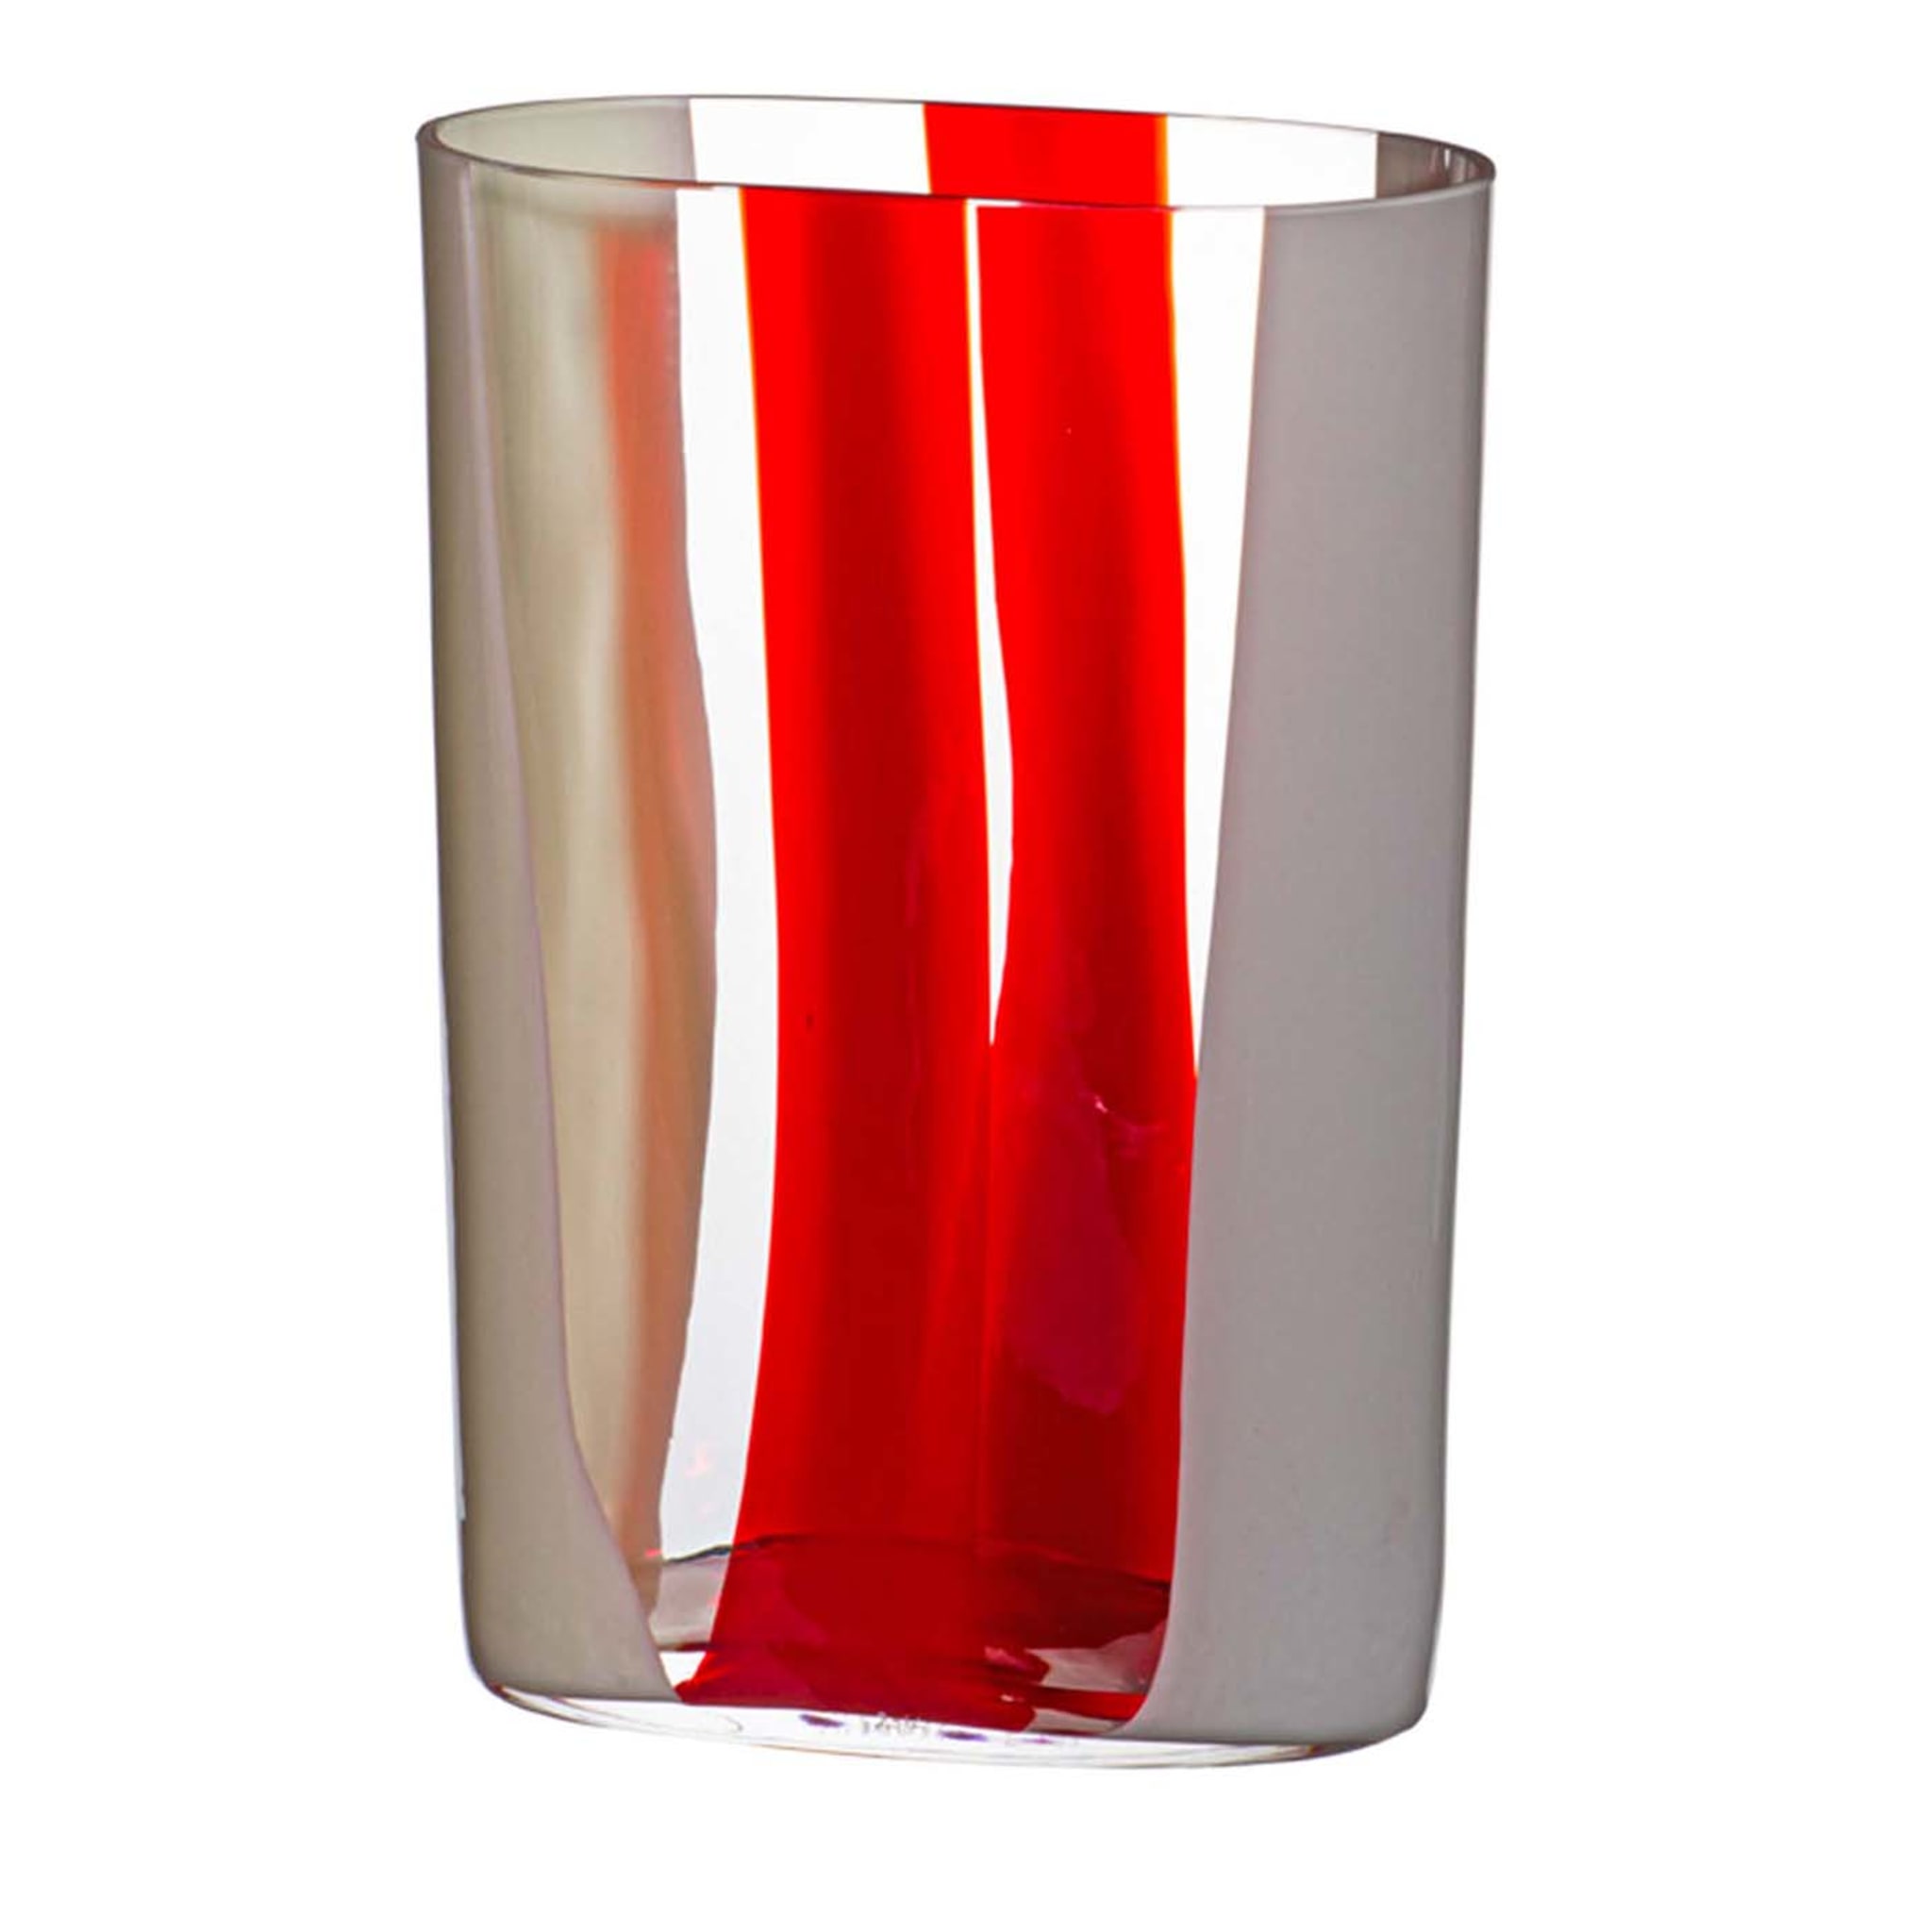 Ovale White and Red Stripes Vase by Carlo Moretti #1 - Main view